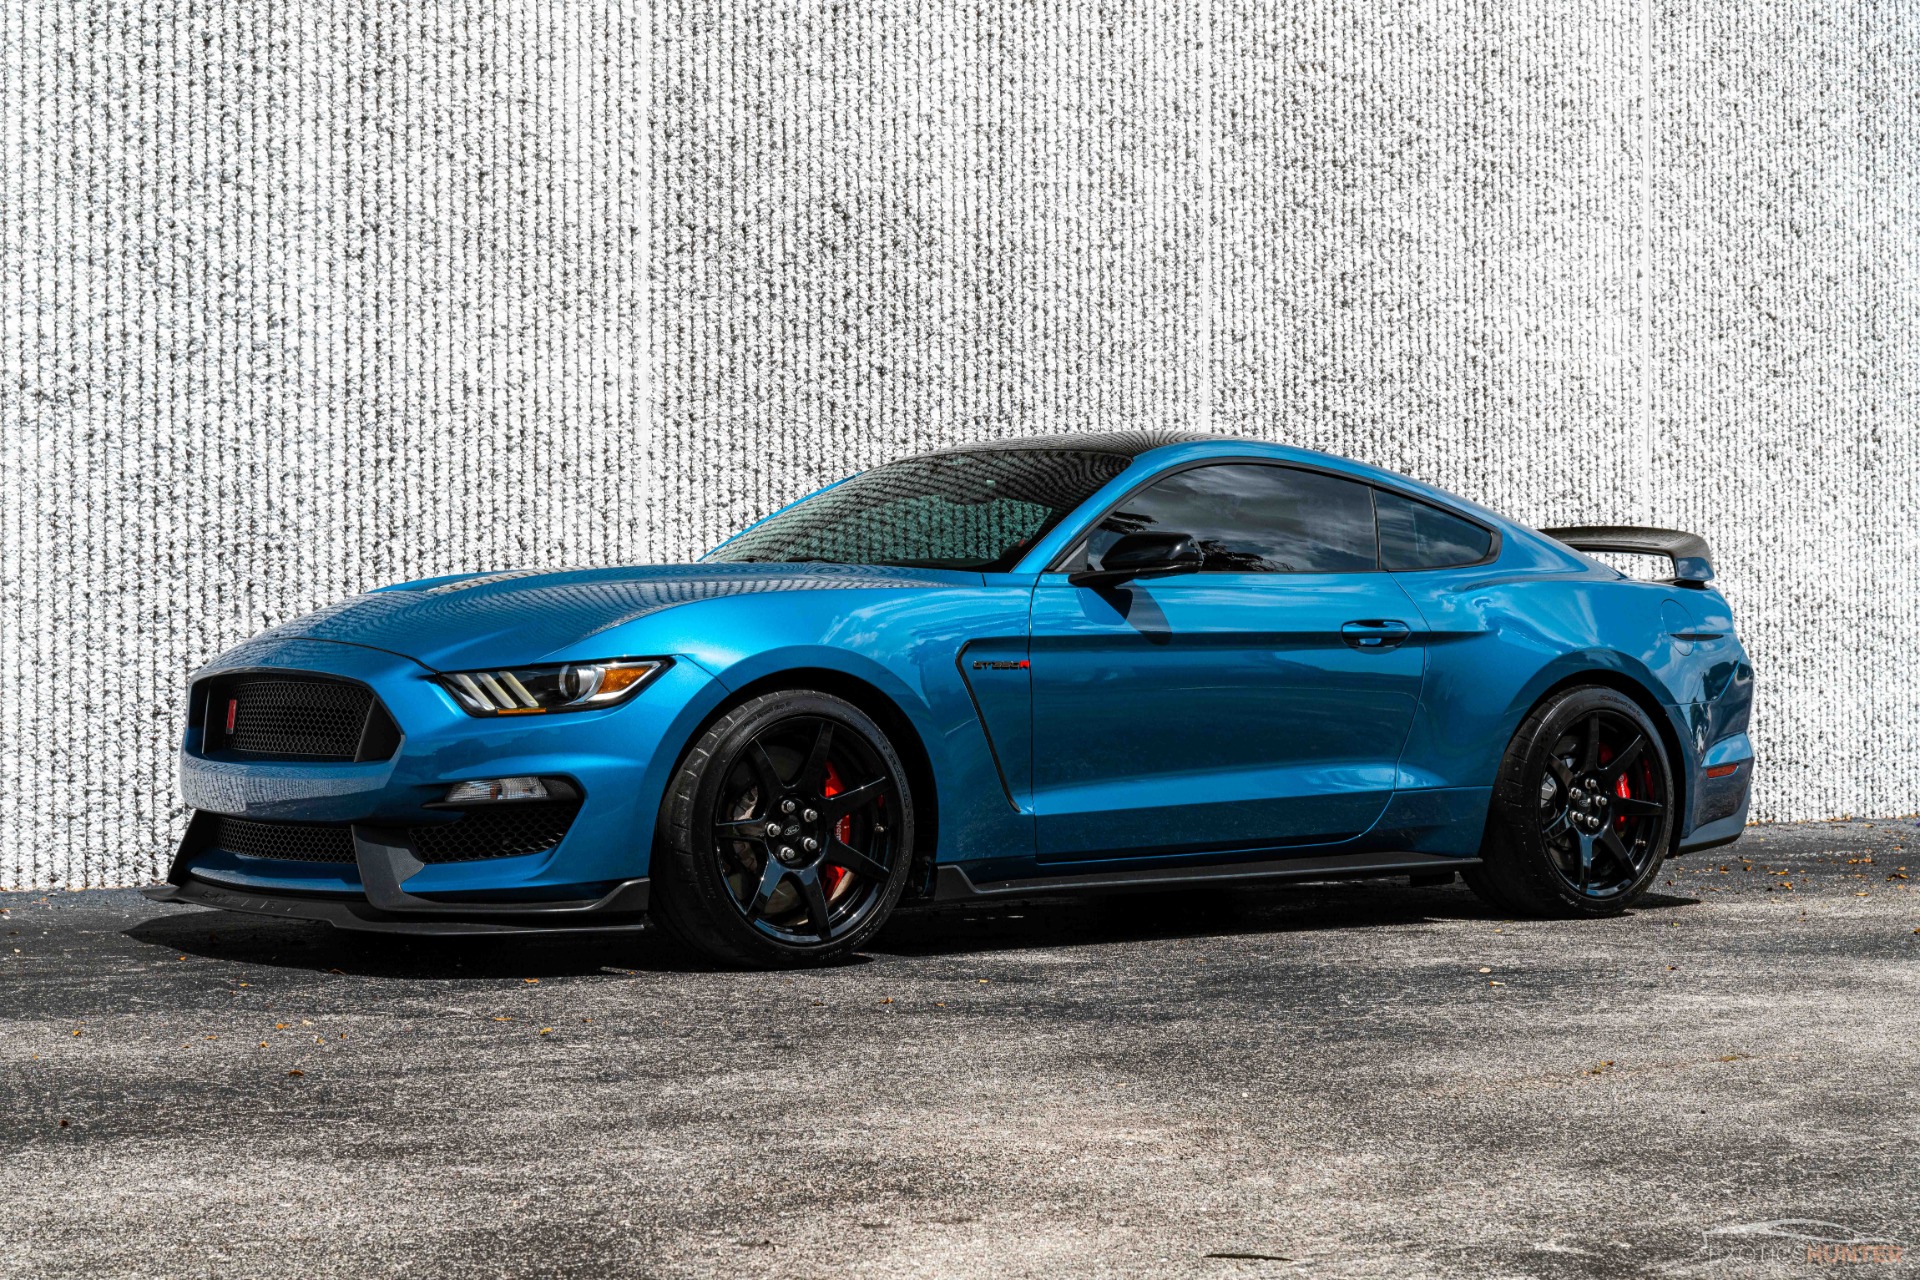 Used 2019 Ford Mustang Shelby GT350R w/ FULL PPF, Electronics Pack ...